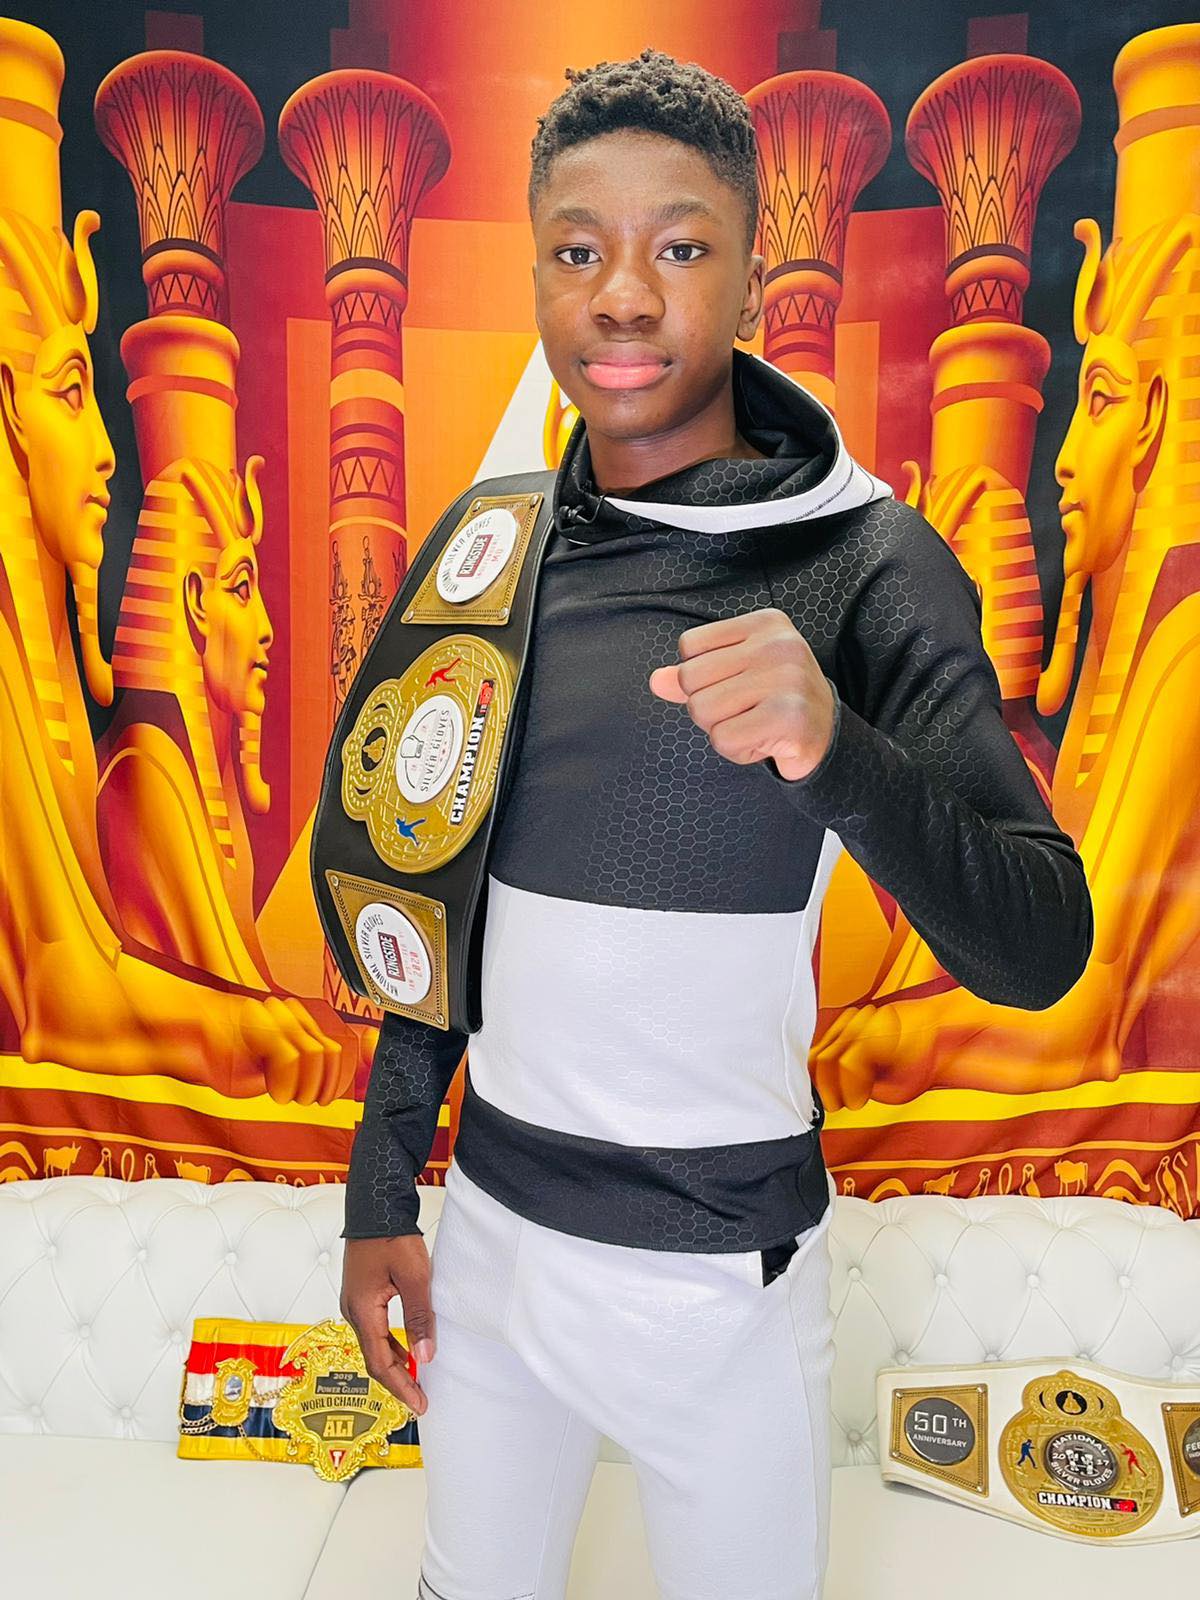 BOXING CHAMPION BECOMES GGY COLLECTIONS BRAND AMBASSADOR